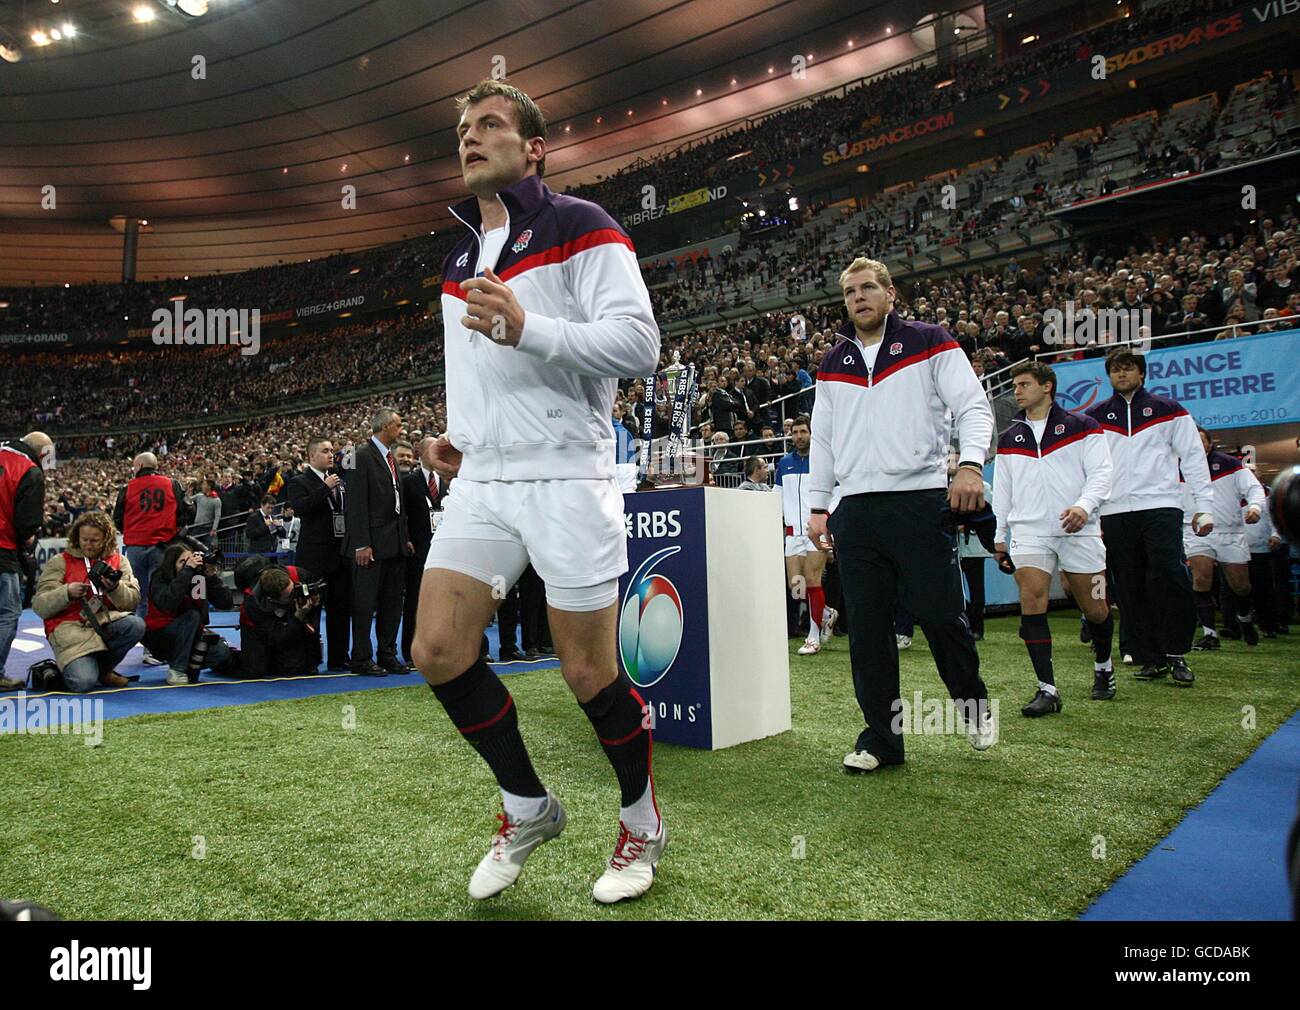 Rugby Union - RBS 6 Nations Championship 2010 - France v England - Stade de France. England's Mark Cueto runs out before the game Stock Photo